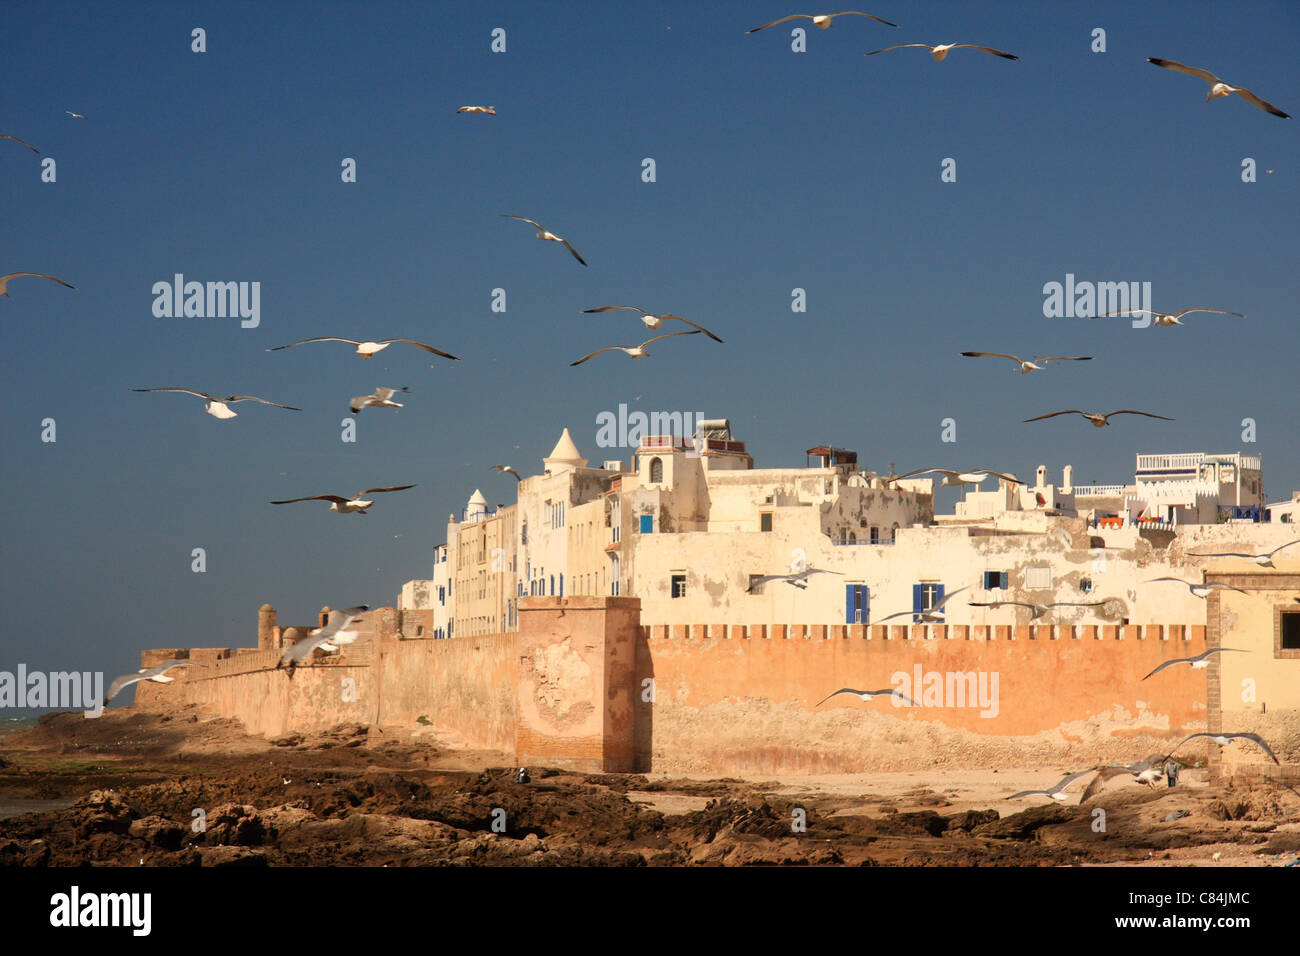 Gulls swirl through the sky above the medina/old town at Essaouira on the Atlantic coast of Morocco, north Africa Stock Photo